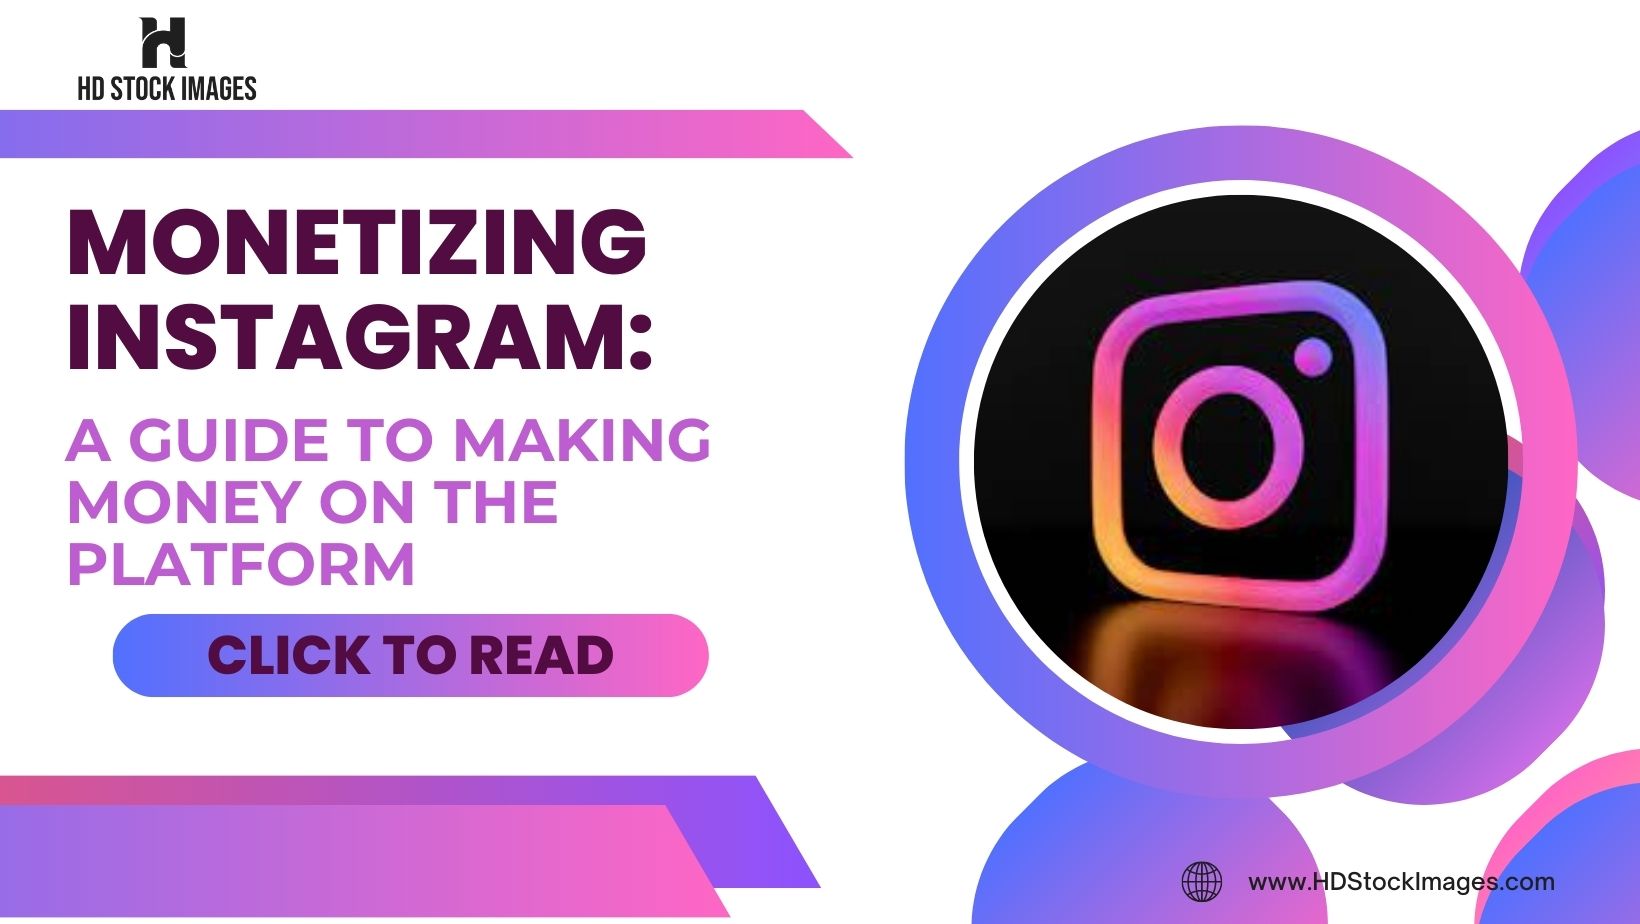 Monetizing Instagram: a Guide to Making Money on the Platform